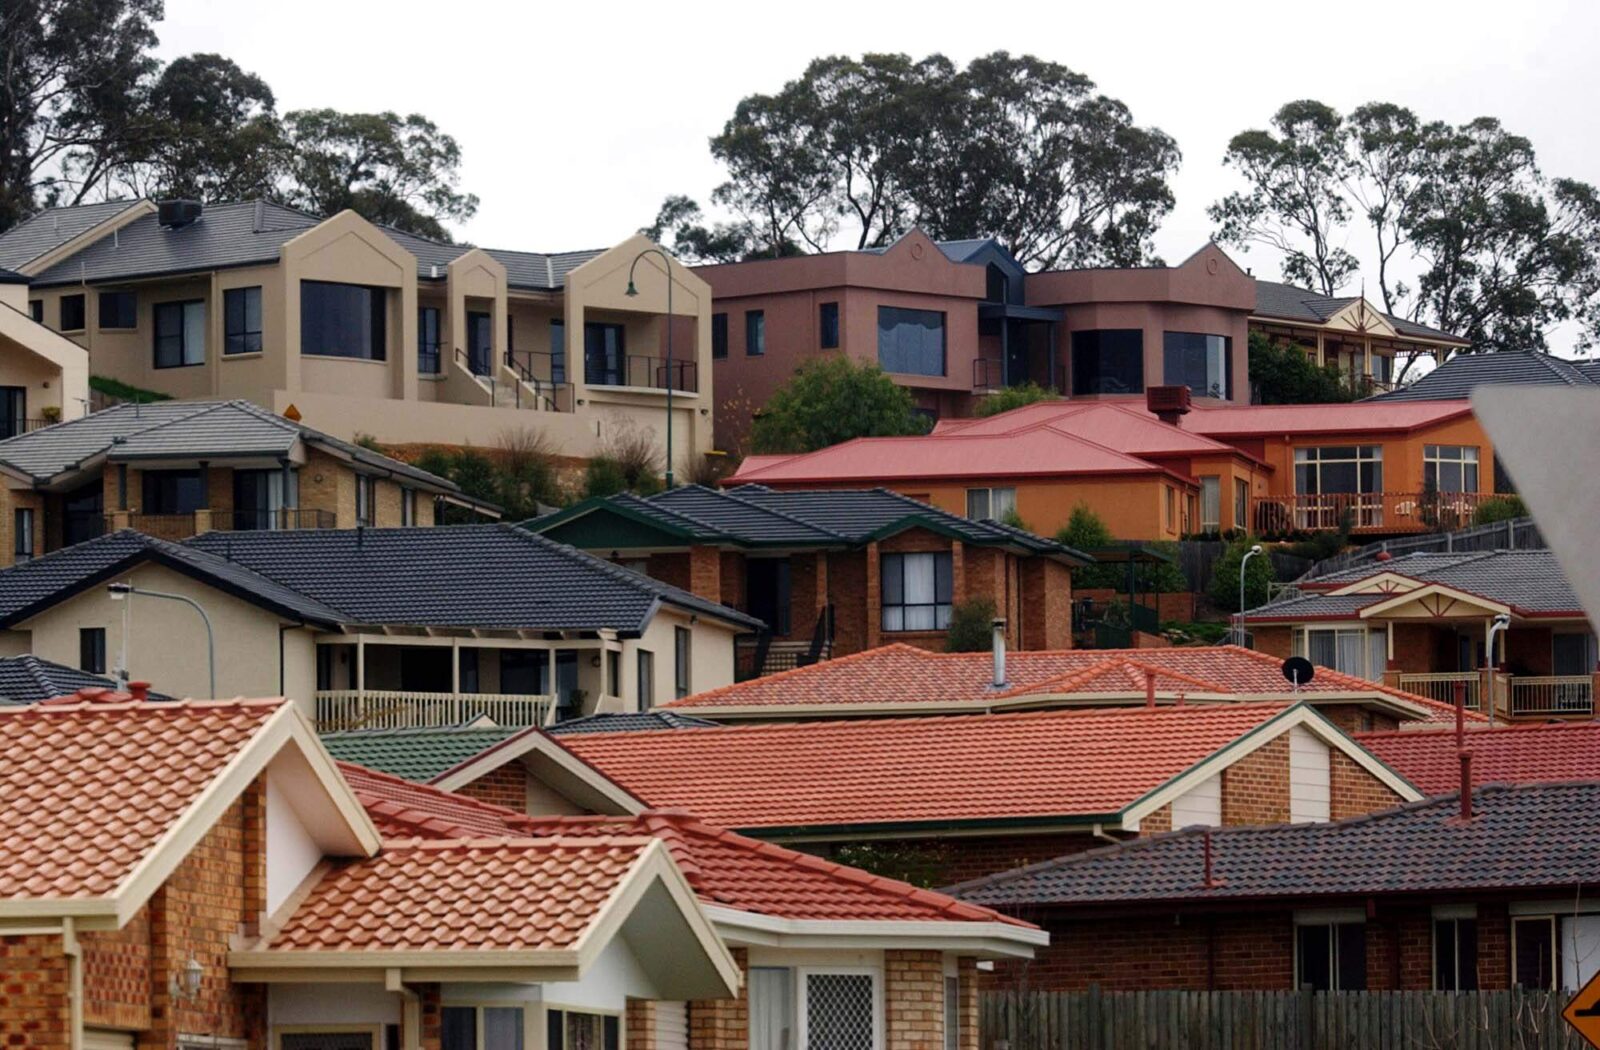 Image of rows of suburban housing